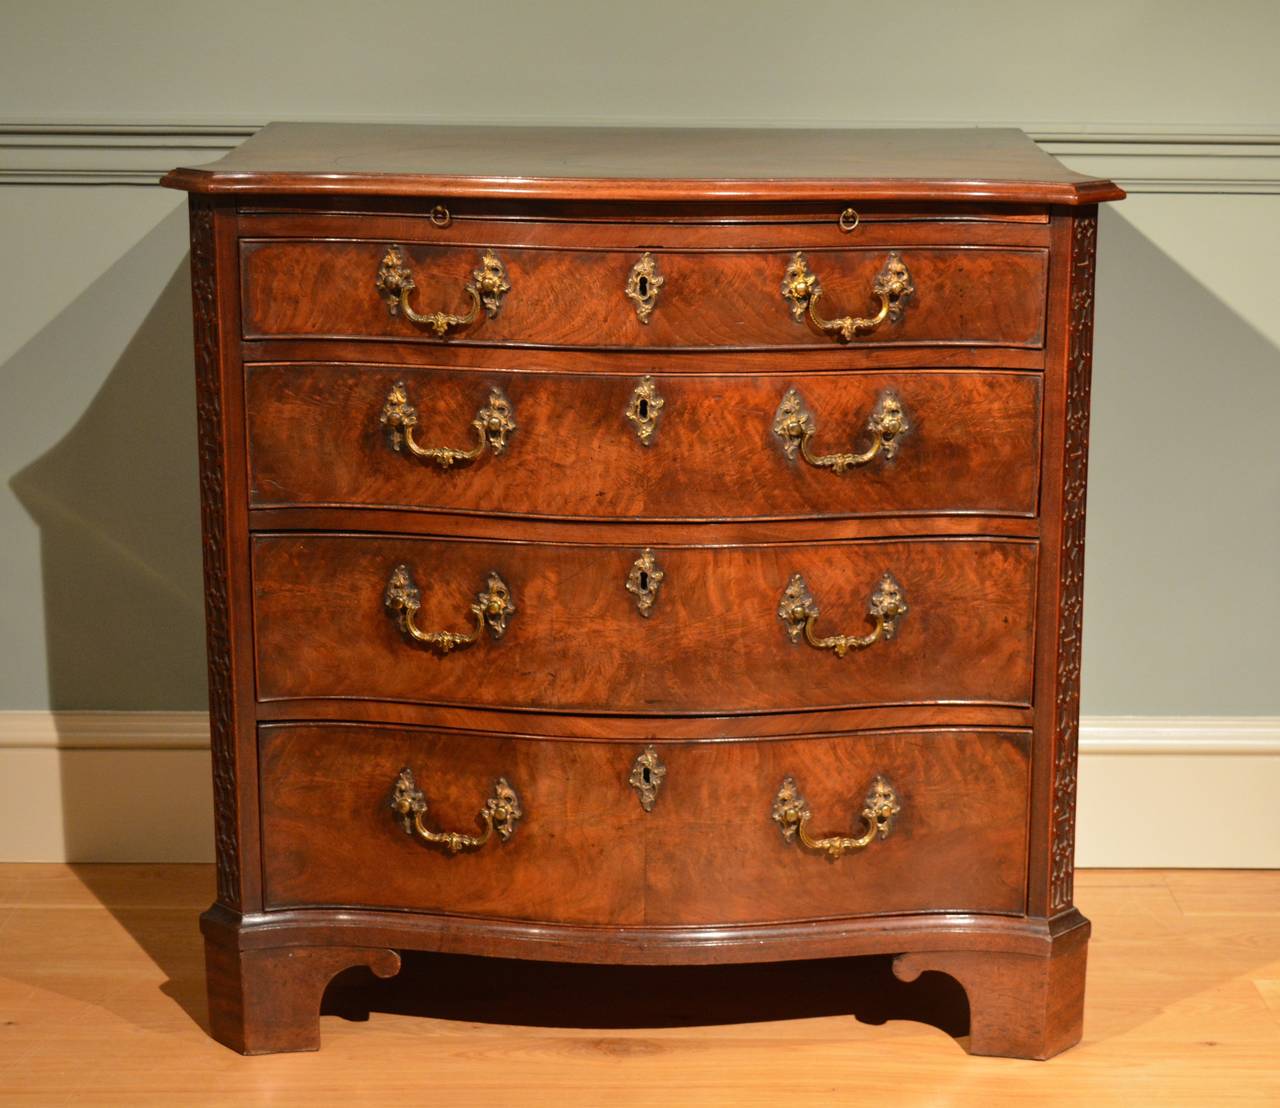 A fine small George III mahogany serpentine chest of four drawers, having blind fret to the canted corners, the drawers with Rococo handles and escutcheons, standing on bracket feet. This piece has finely figured veneers of excellent colour and